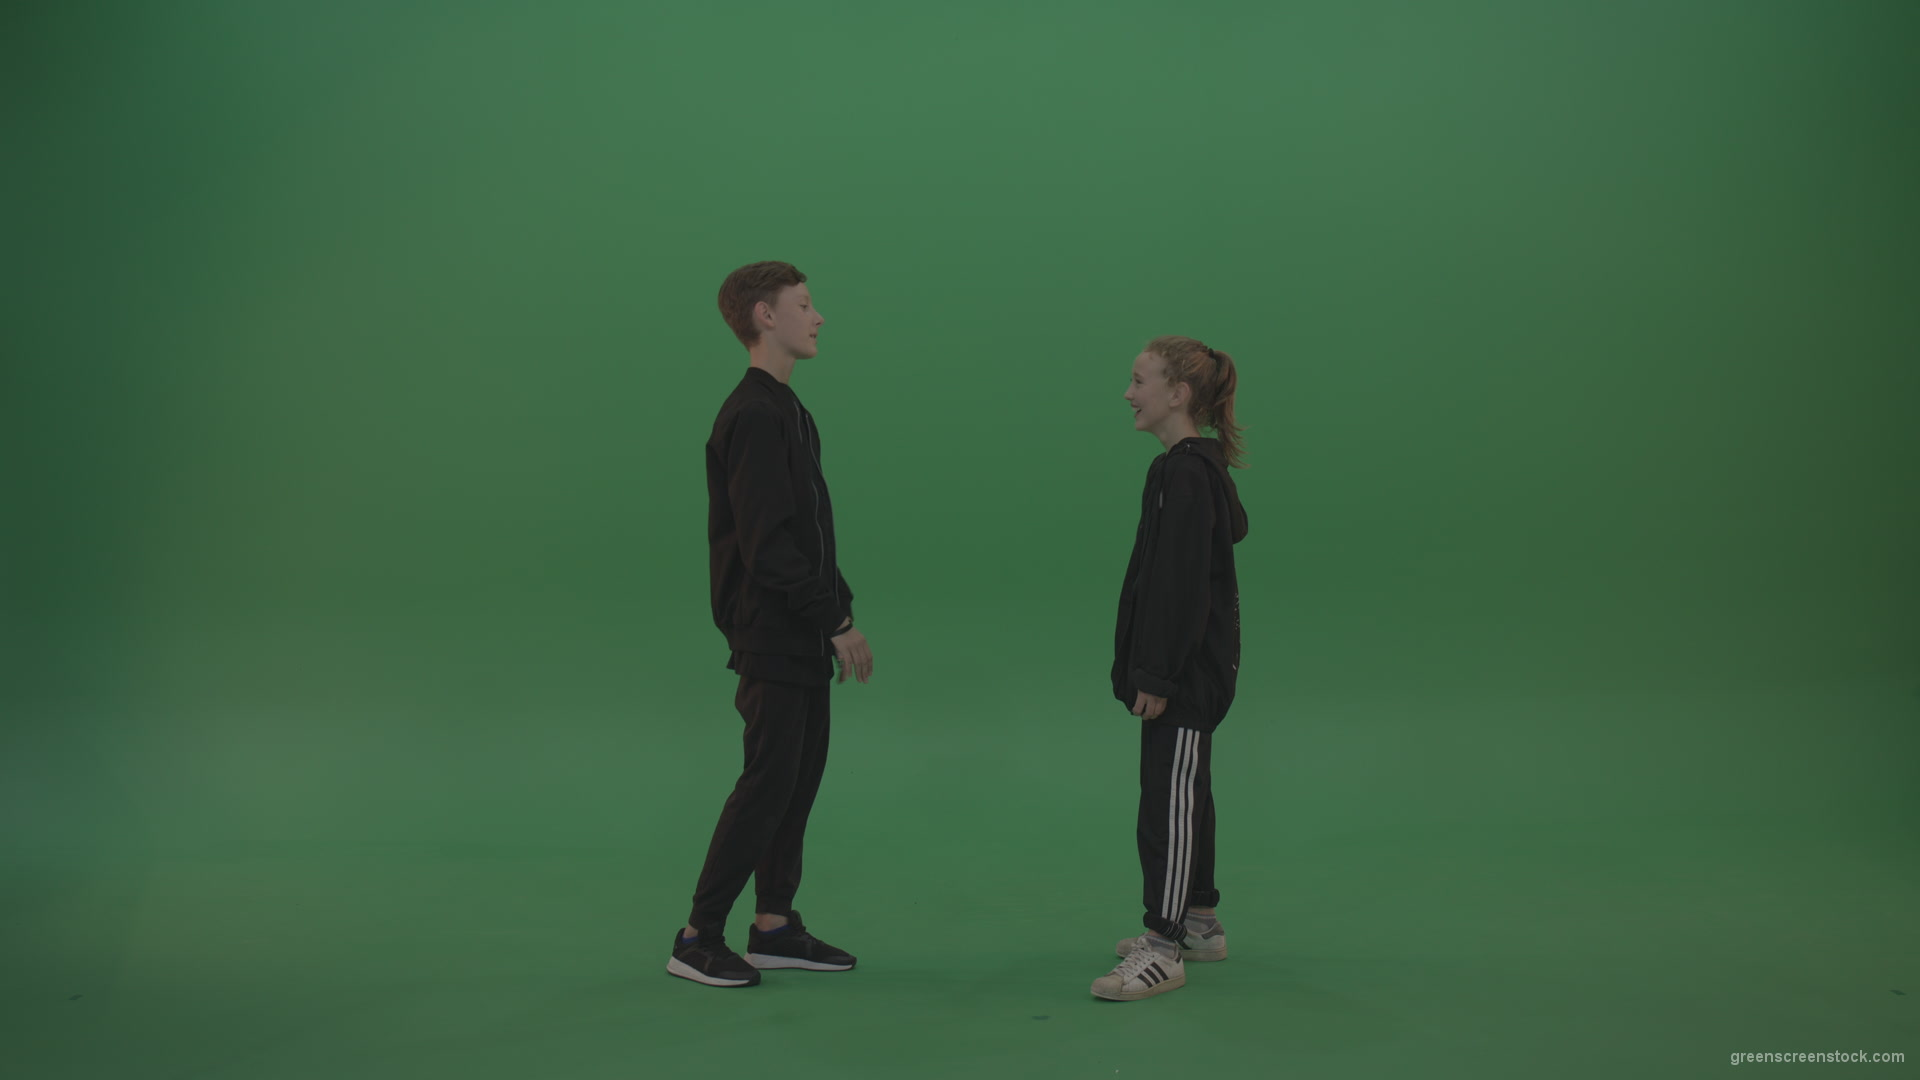 Boy-in-black-wear-talks-to-girl-over-chromakey-background_007 Green Screen Stock